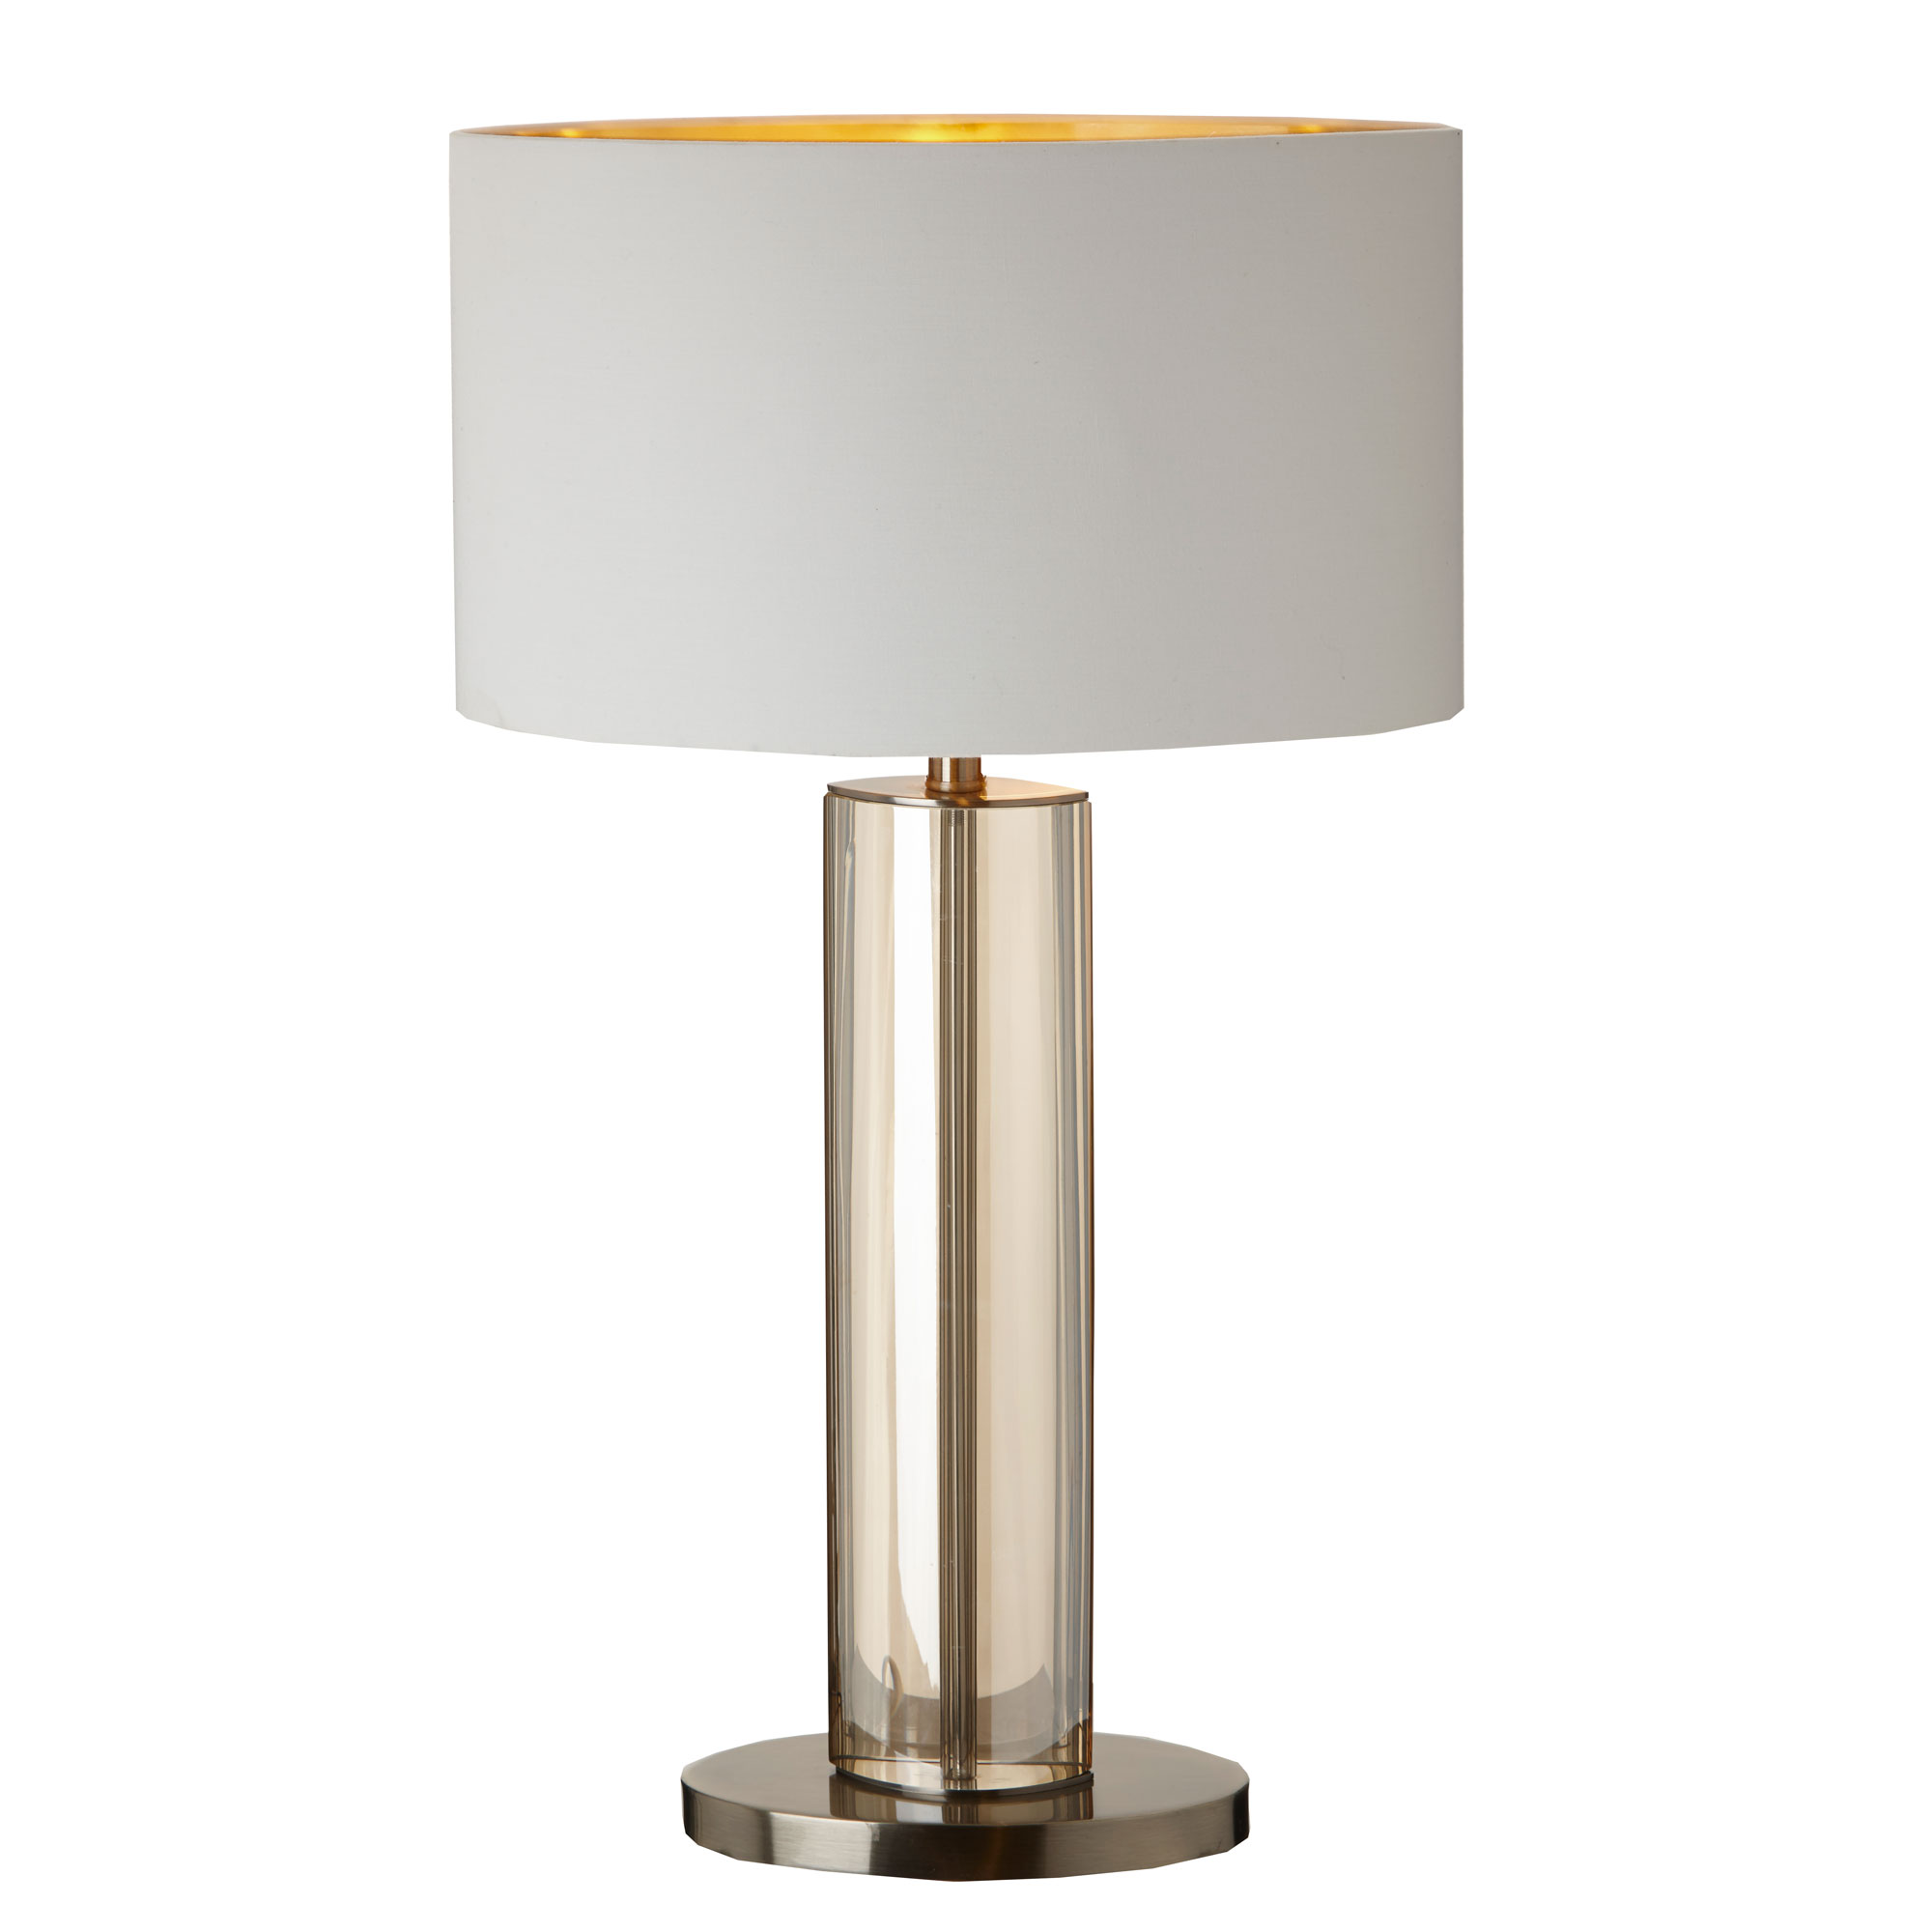 Lisle Table Lamp cognac crystal and antique brass table lamp